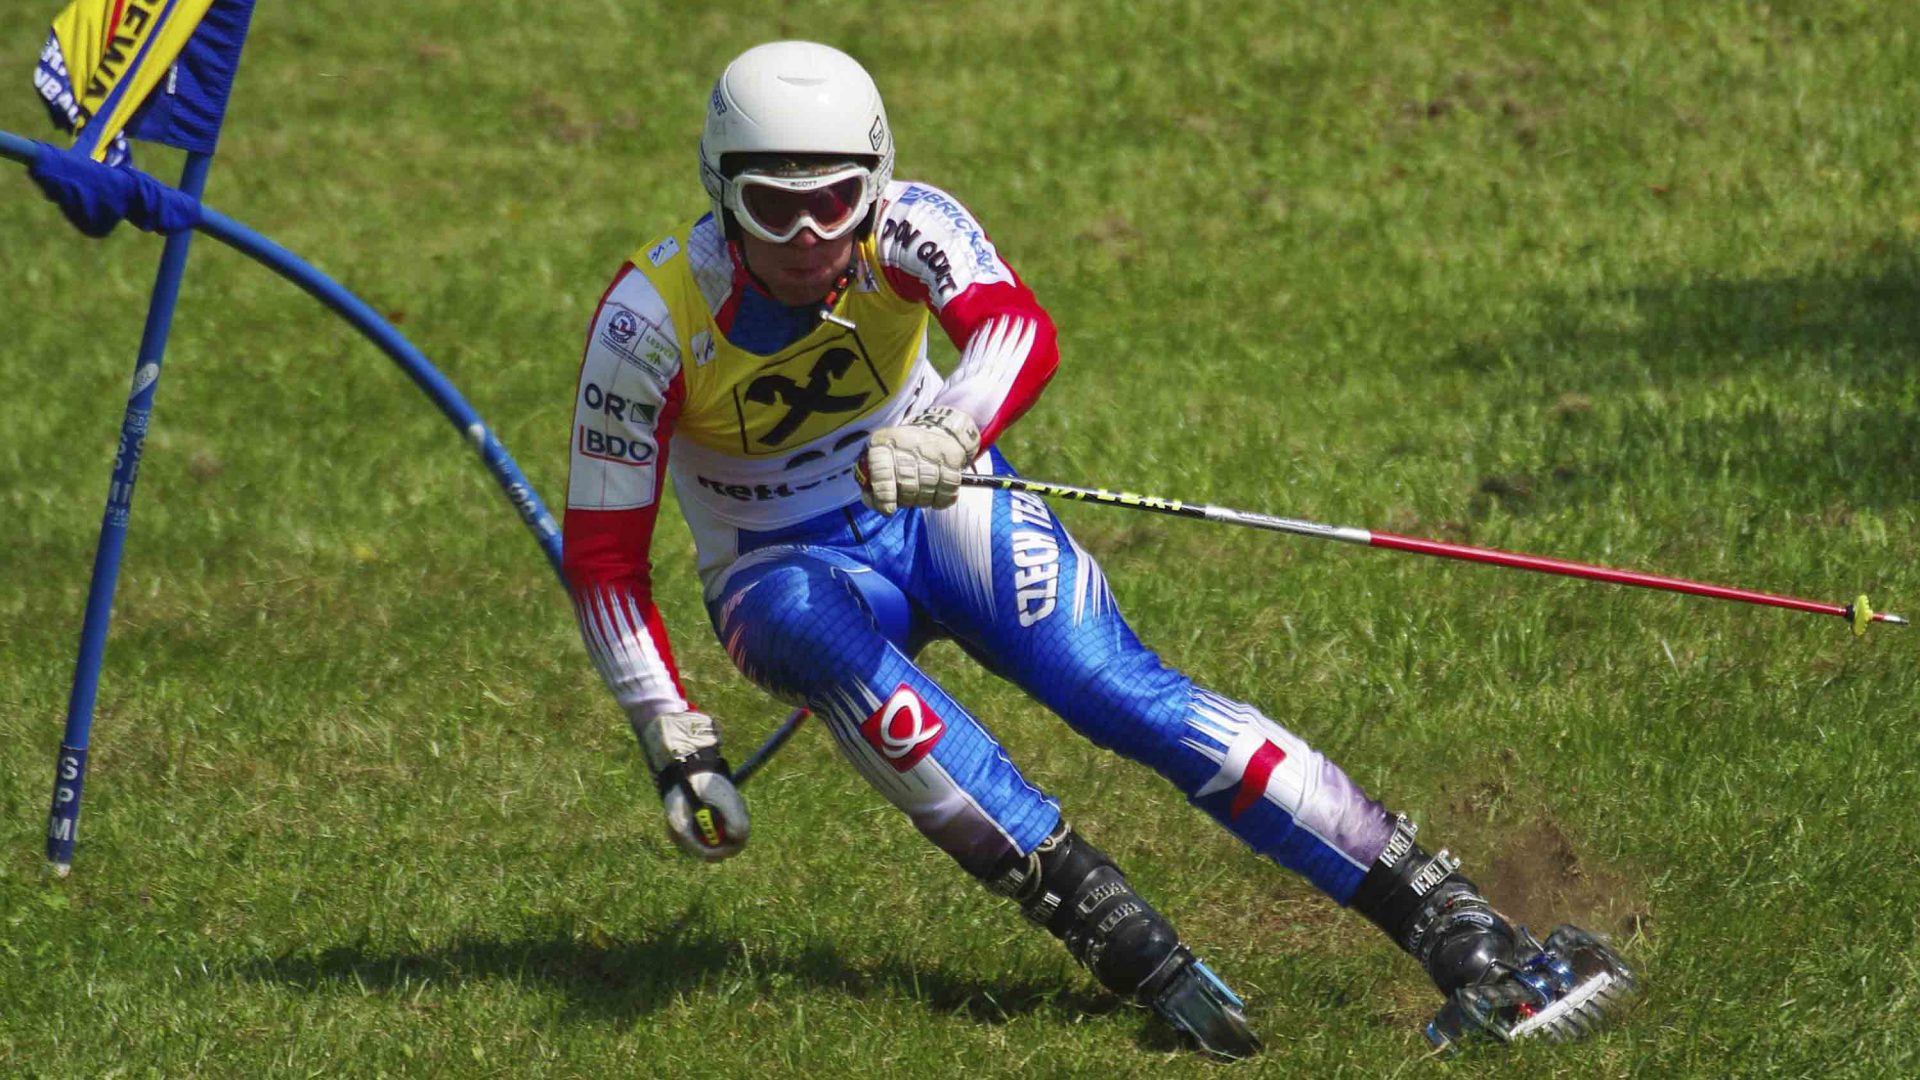 A woman competes in a grass skiing competition.